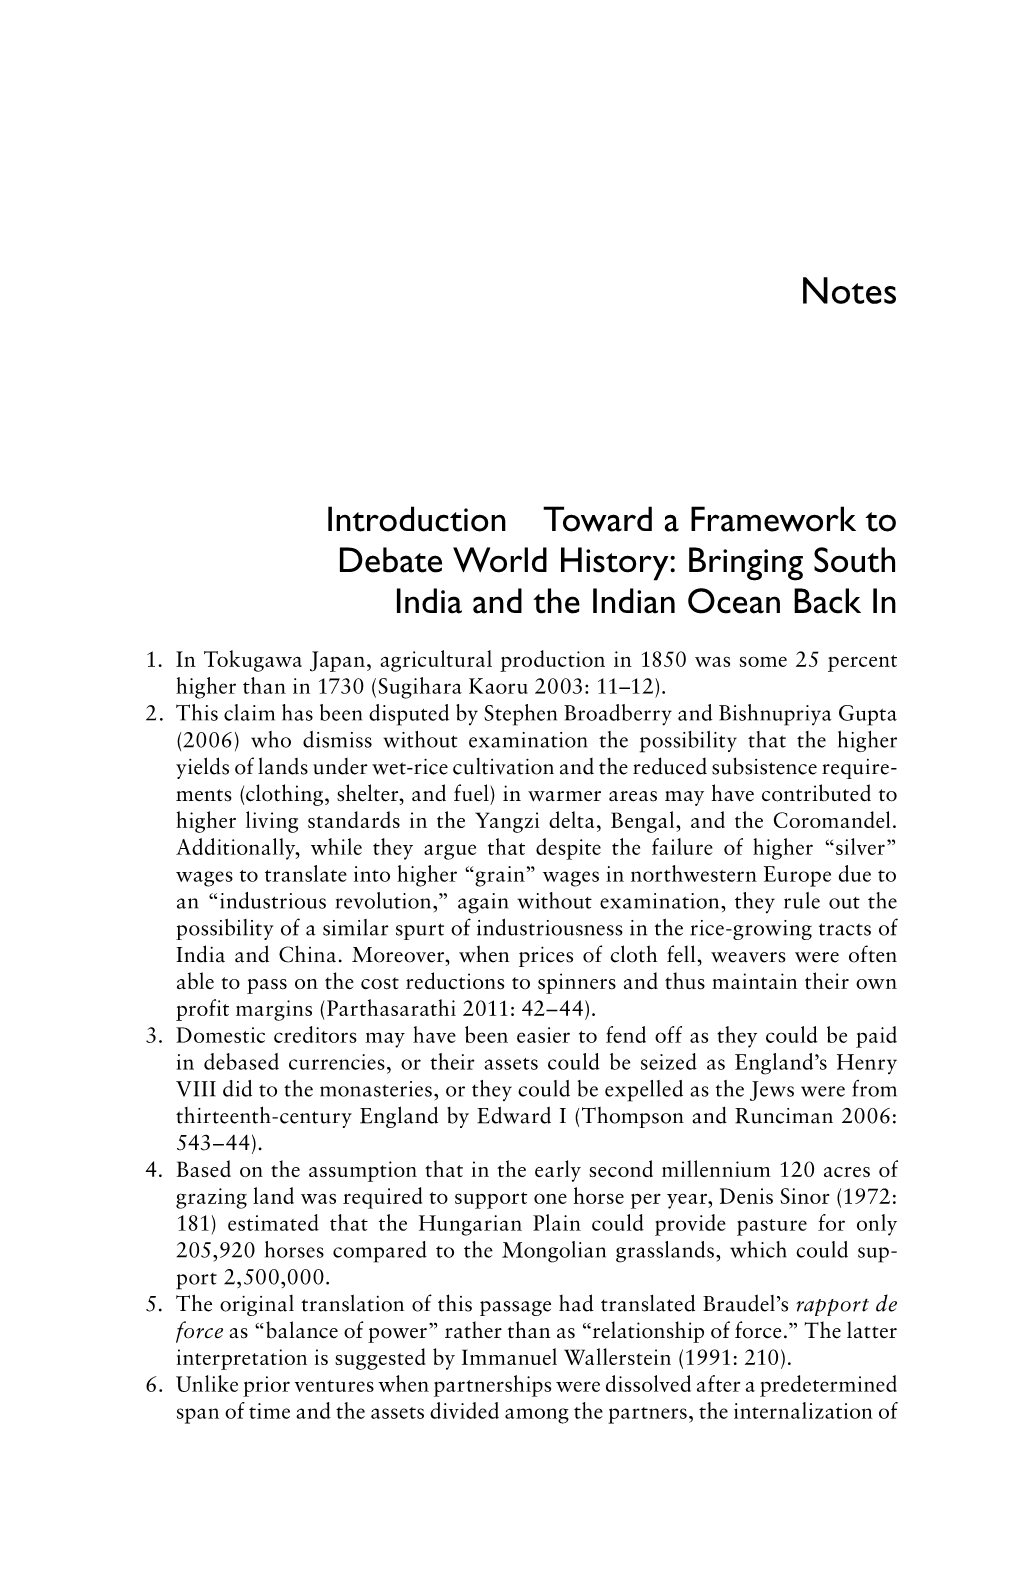 Introduction Toward a Framework to Debate World History: Bringing South India and the Indian Ocean Back In